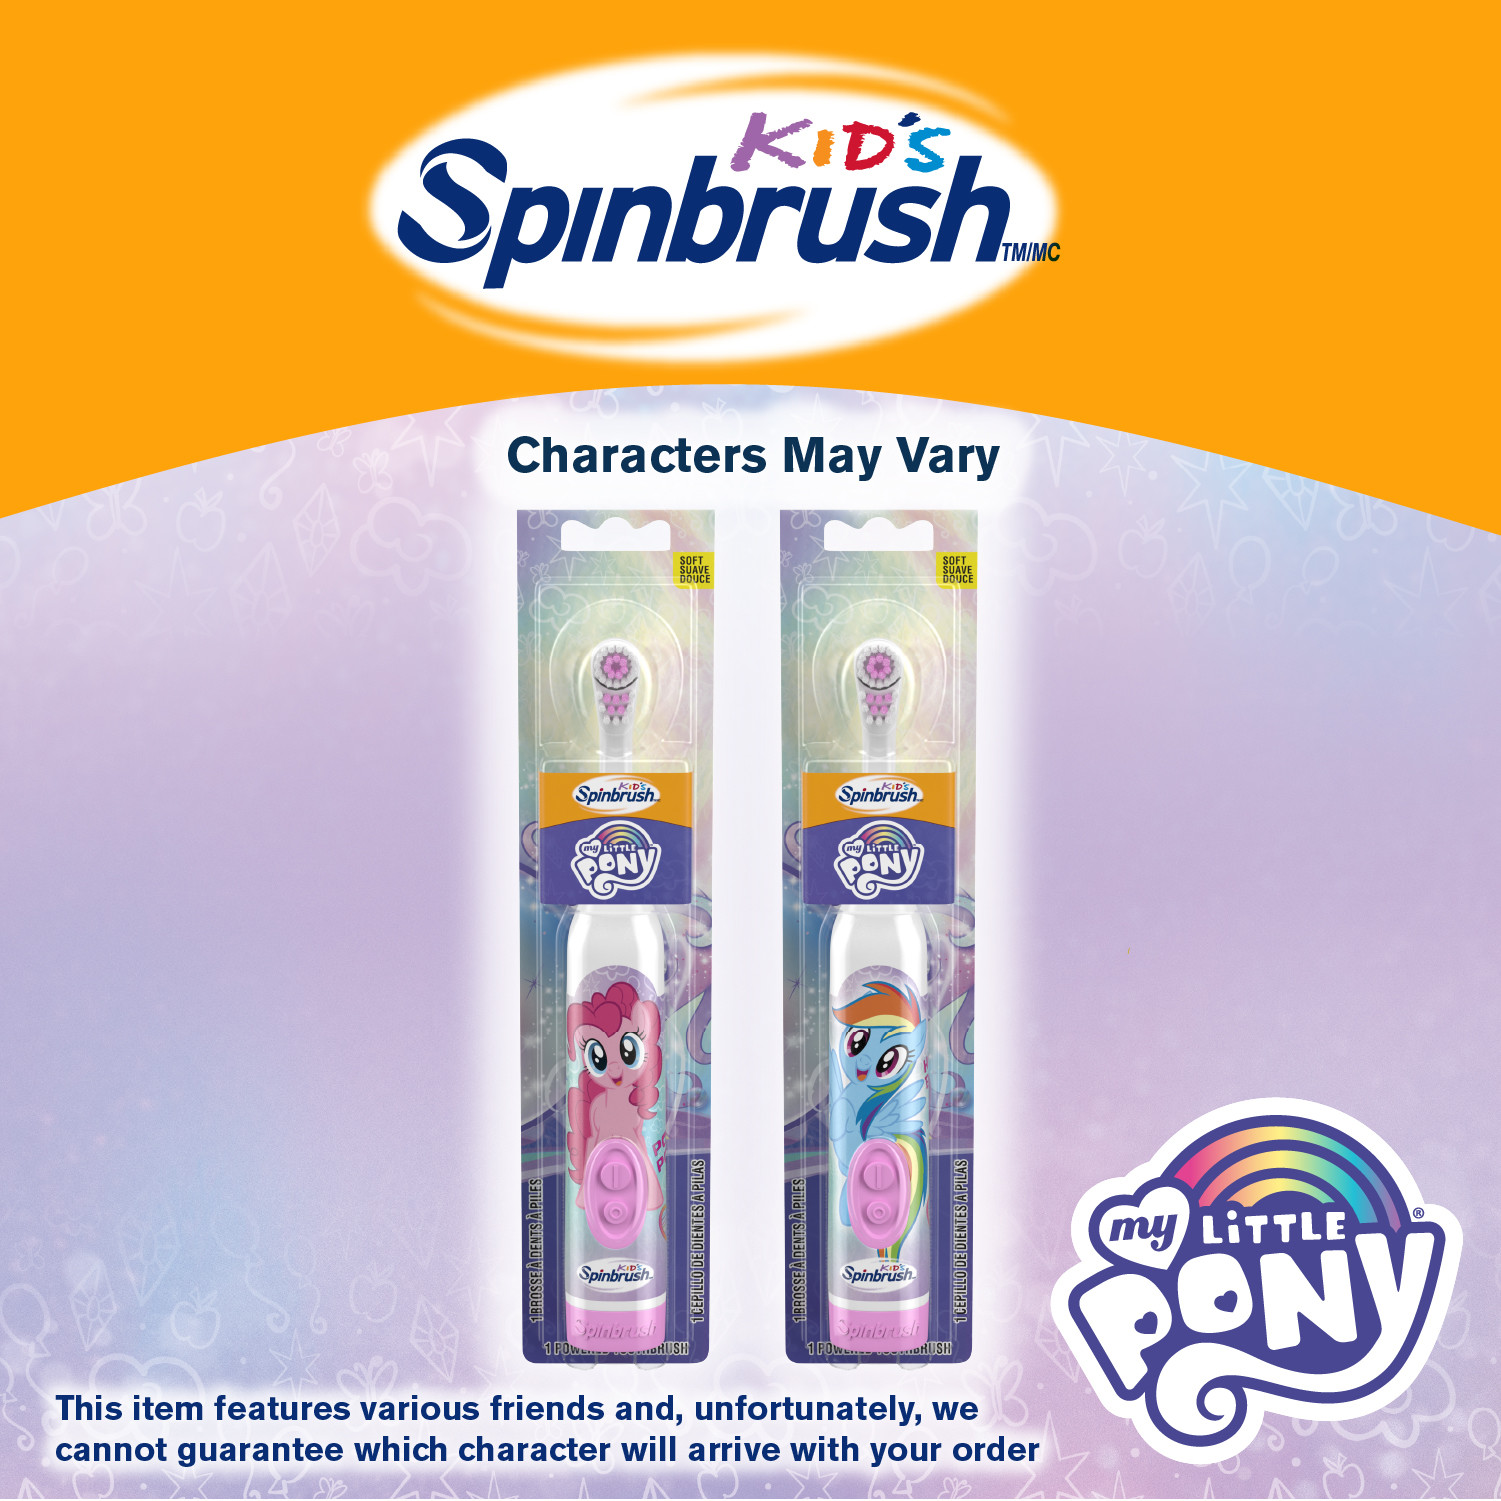 My Little Pony Kid’s Spinbrush Electric Battery Toothbrush, Soft, 1 ct, Character May Vary - image 4 of 8